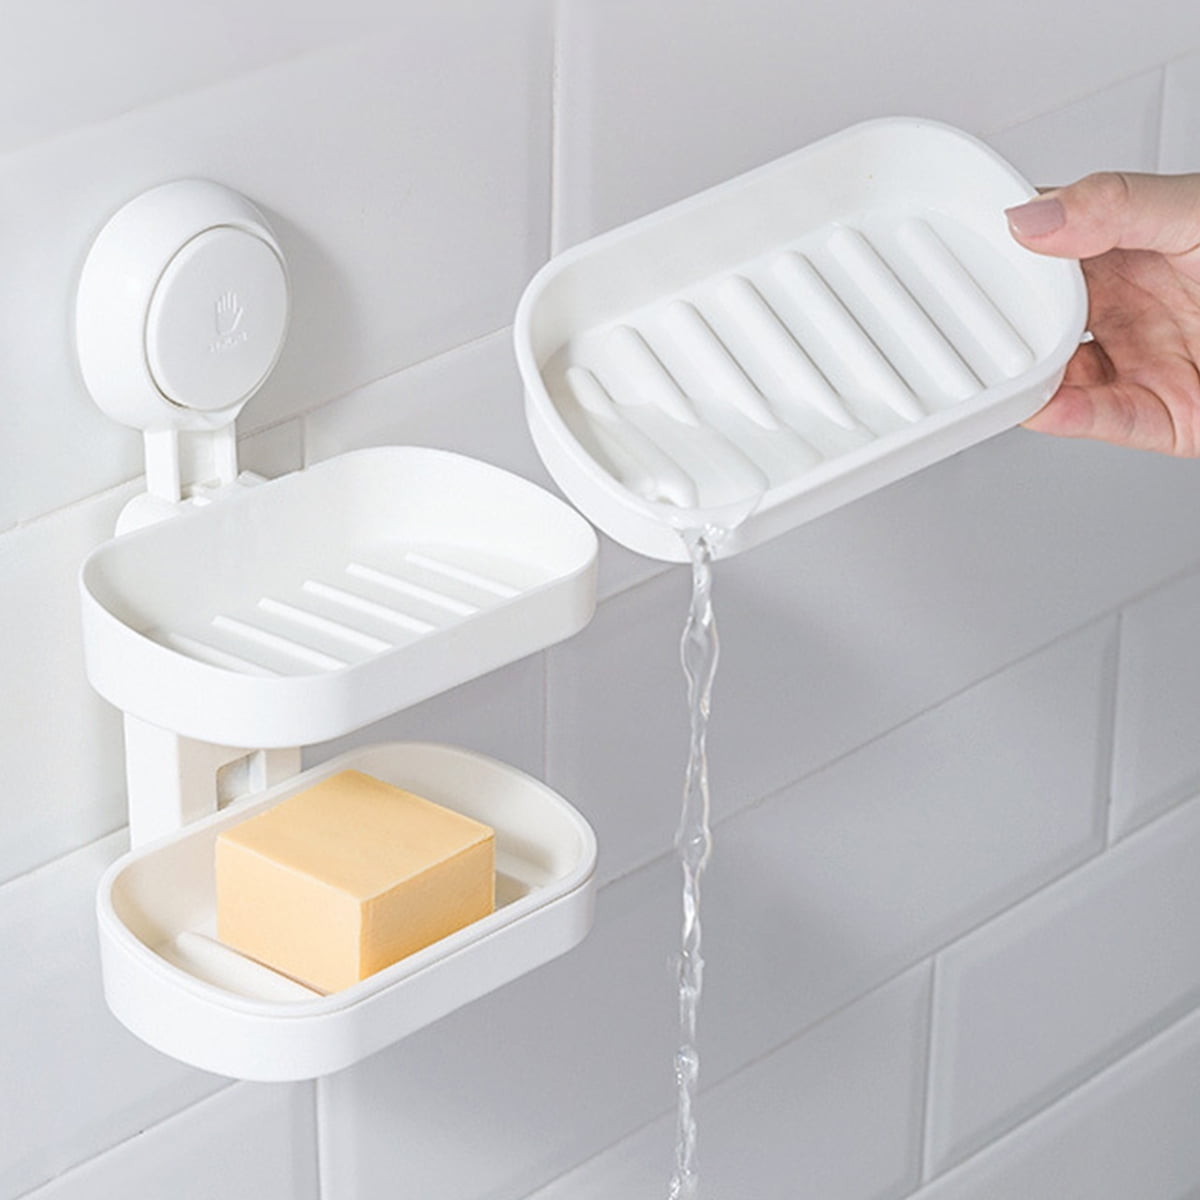 2/3 Layers New Version Super Powerful Self-Adhesive Soap Dish Holder for  Bathroom Shower and Kitchen Wall Mounted Rotatable Soap Holder Saver Box  Storage by TZUTOGETHER 